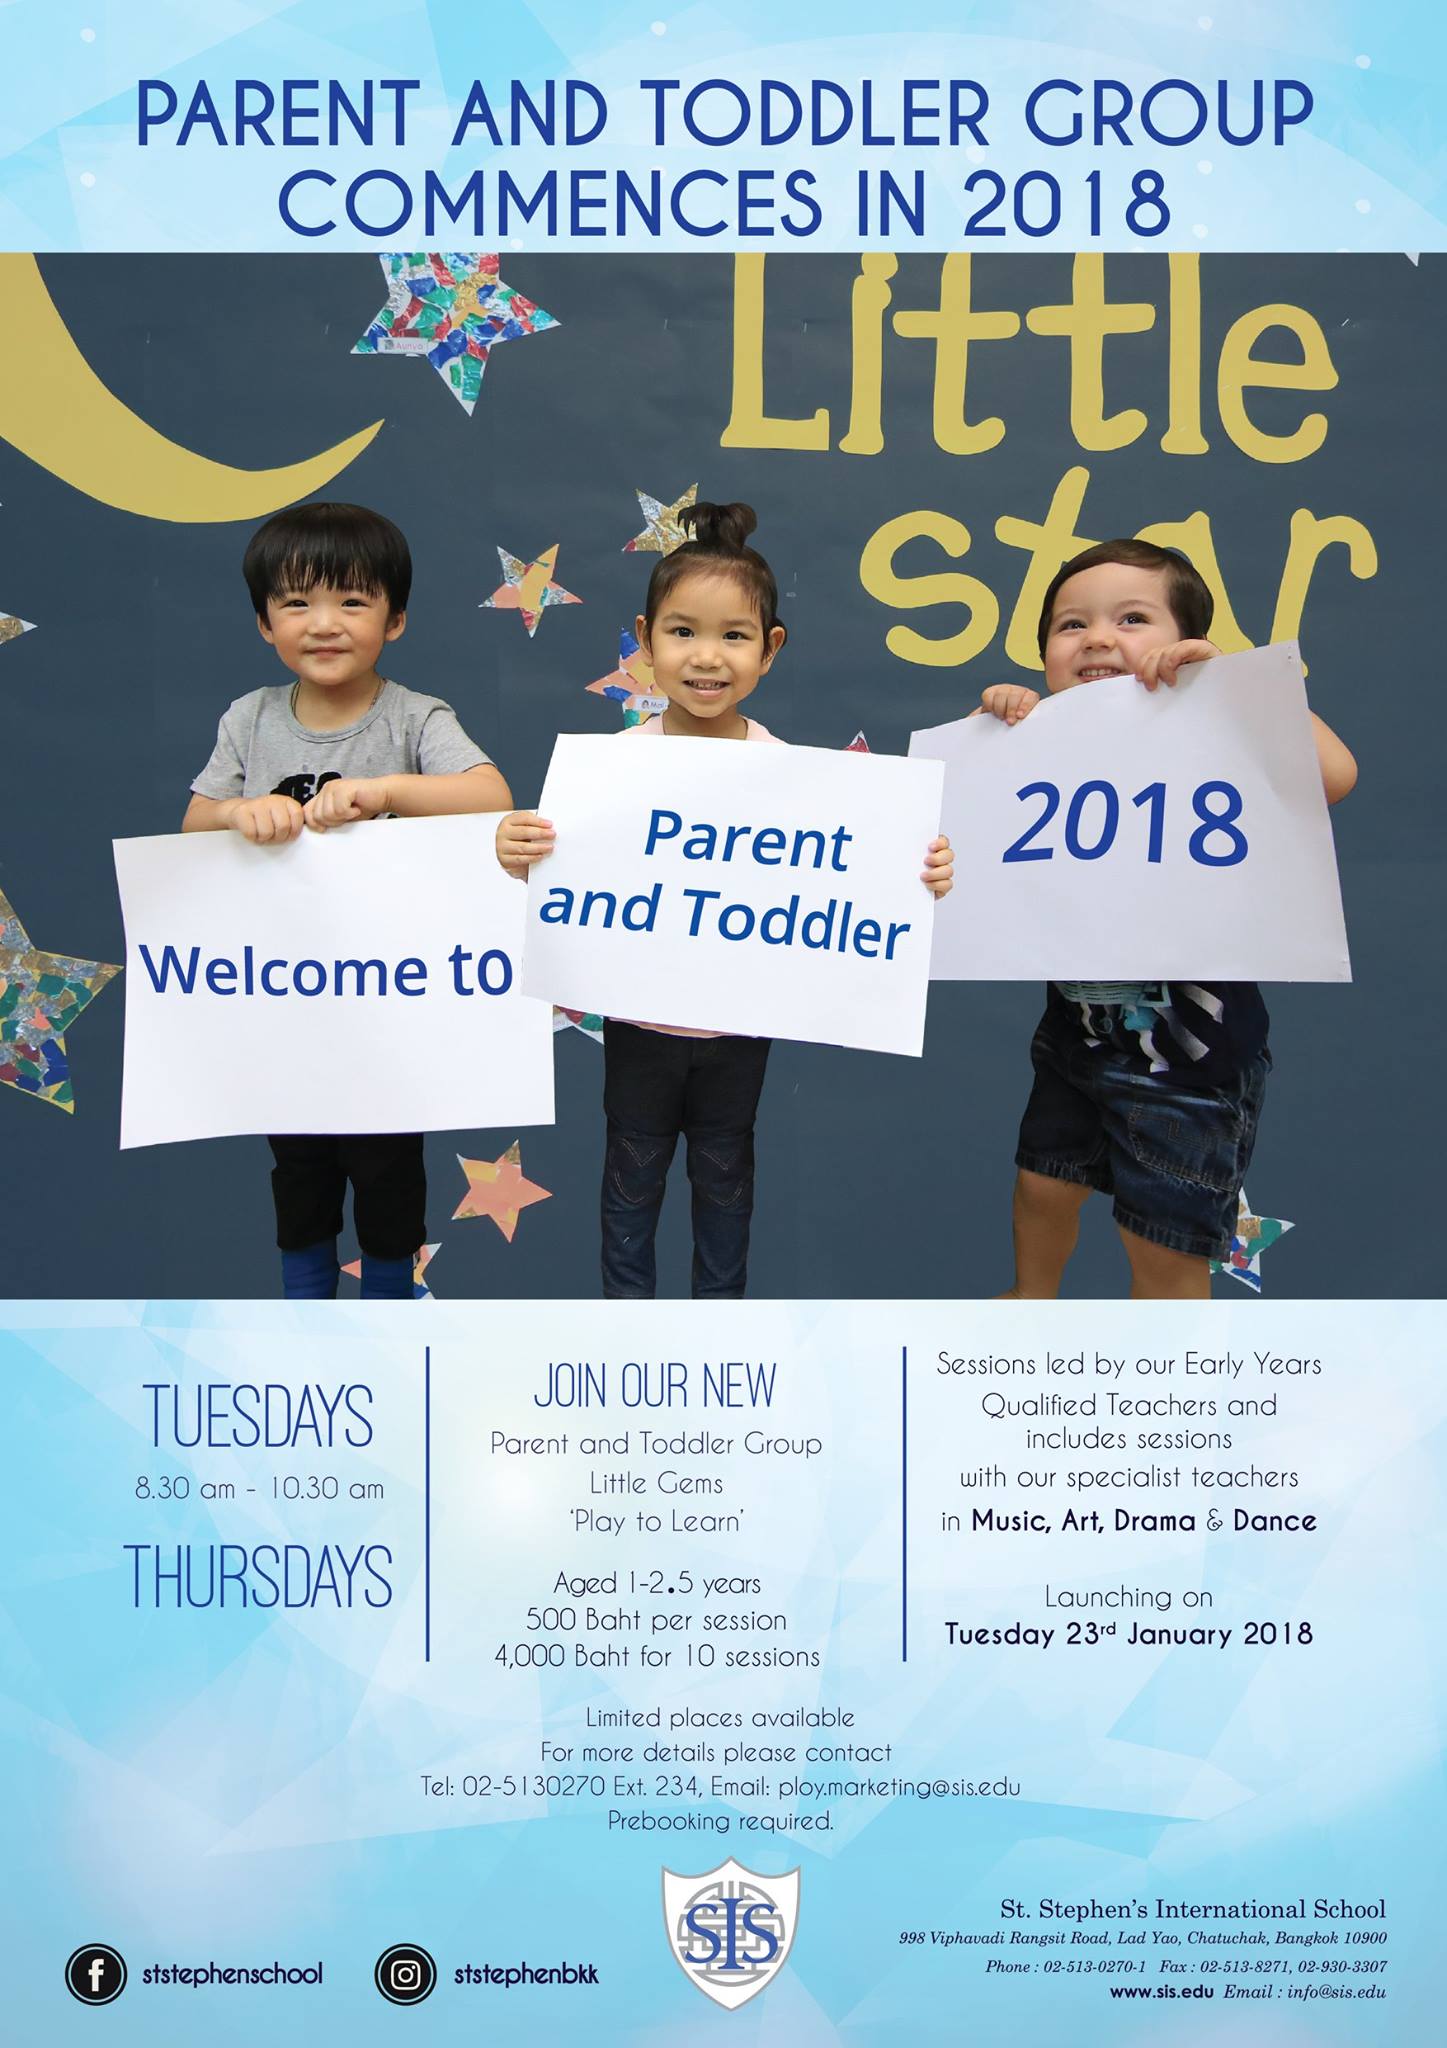 Join our Parent and Toddler Group Commences in 2018: Little Gems, aged 1-2.5 years.  รูปที่ 1